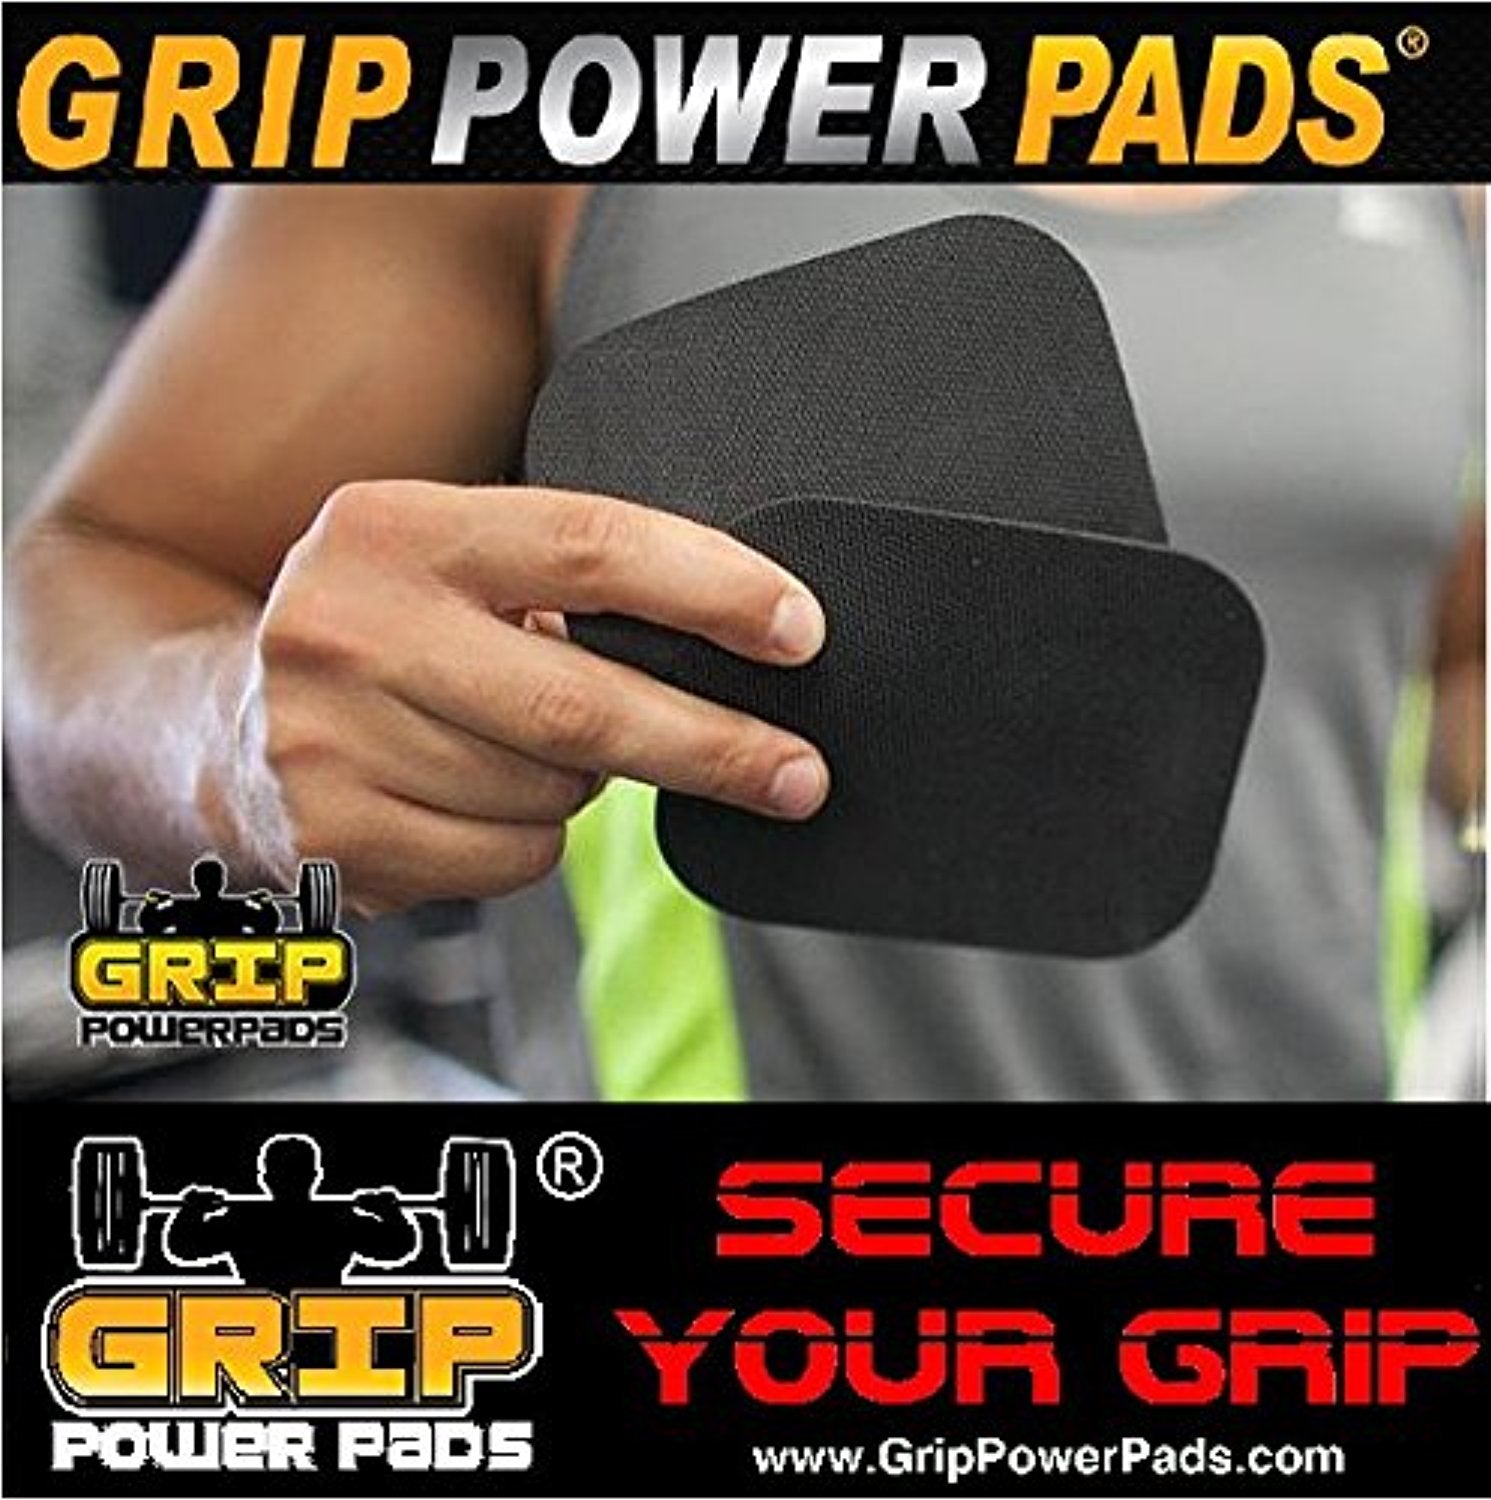 GRIP POWER PADS - Alternative To Gym Workout Gloves. Comfortable Weight Grip Pad - Everyday Crosstrain